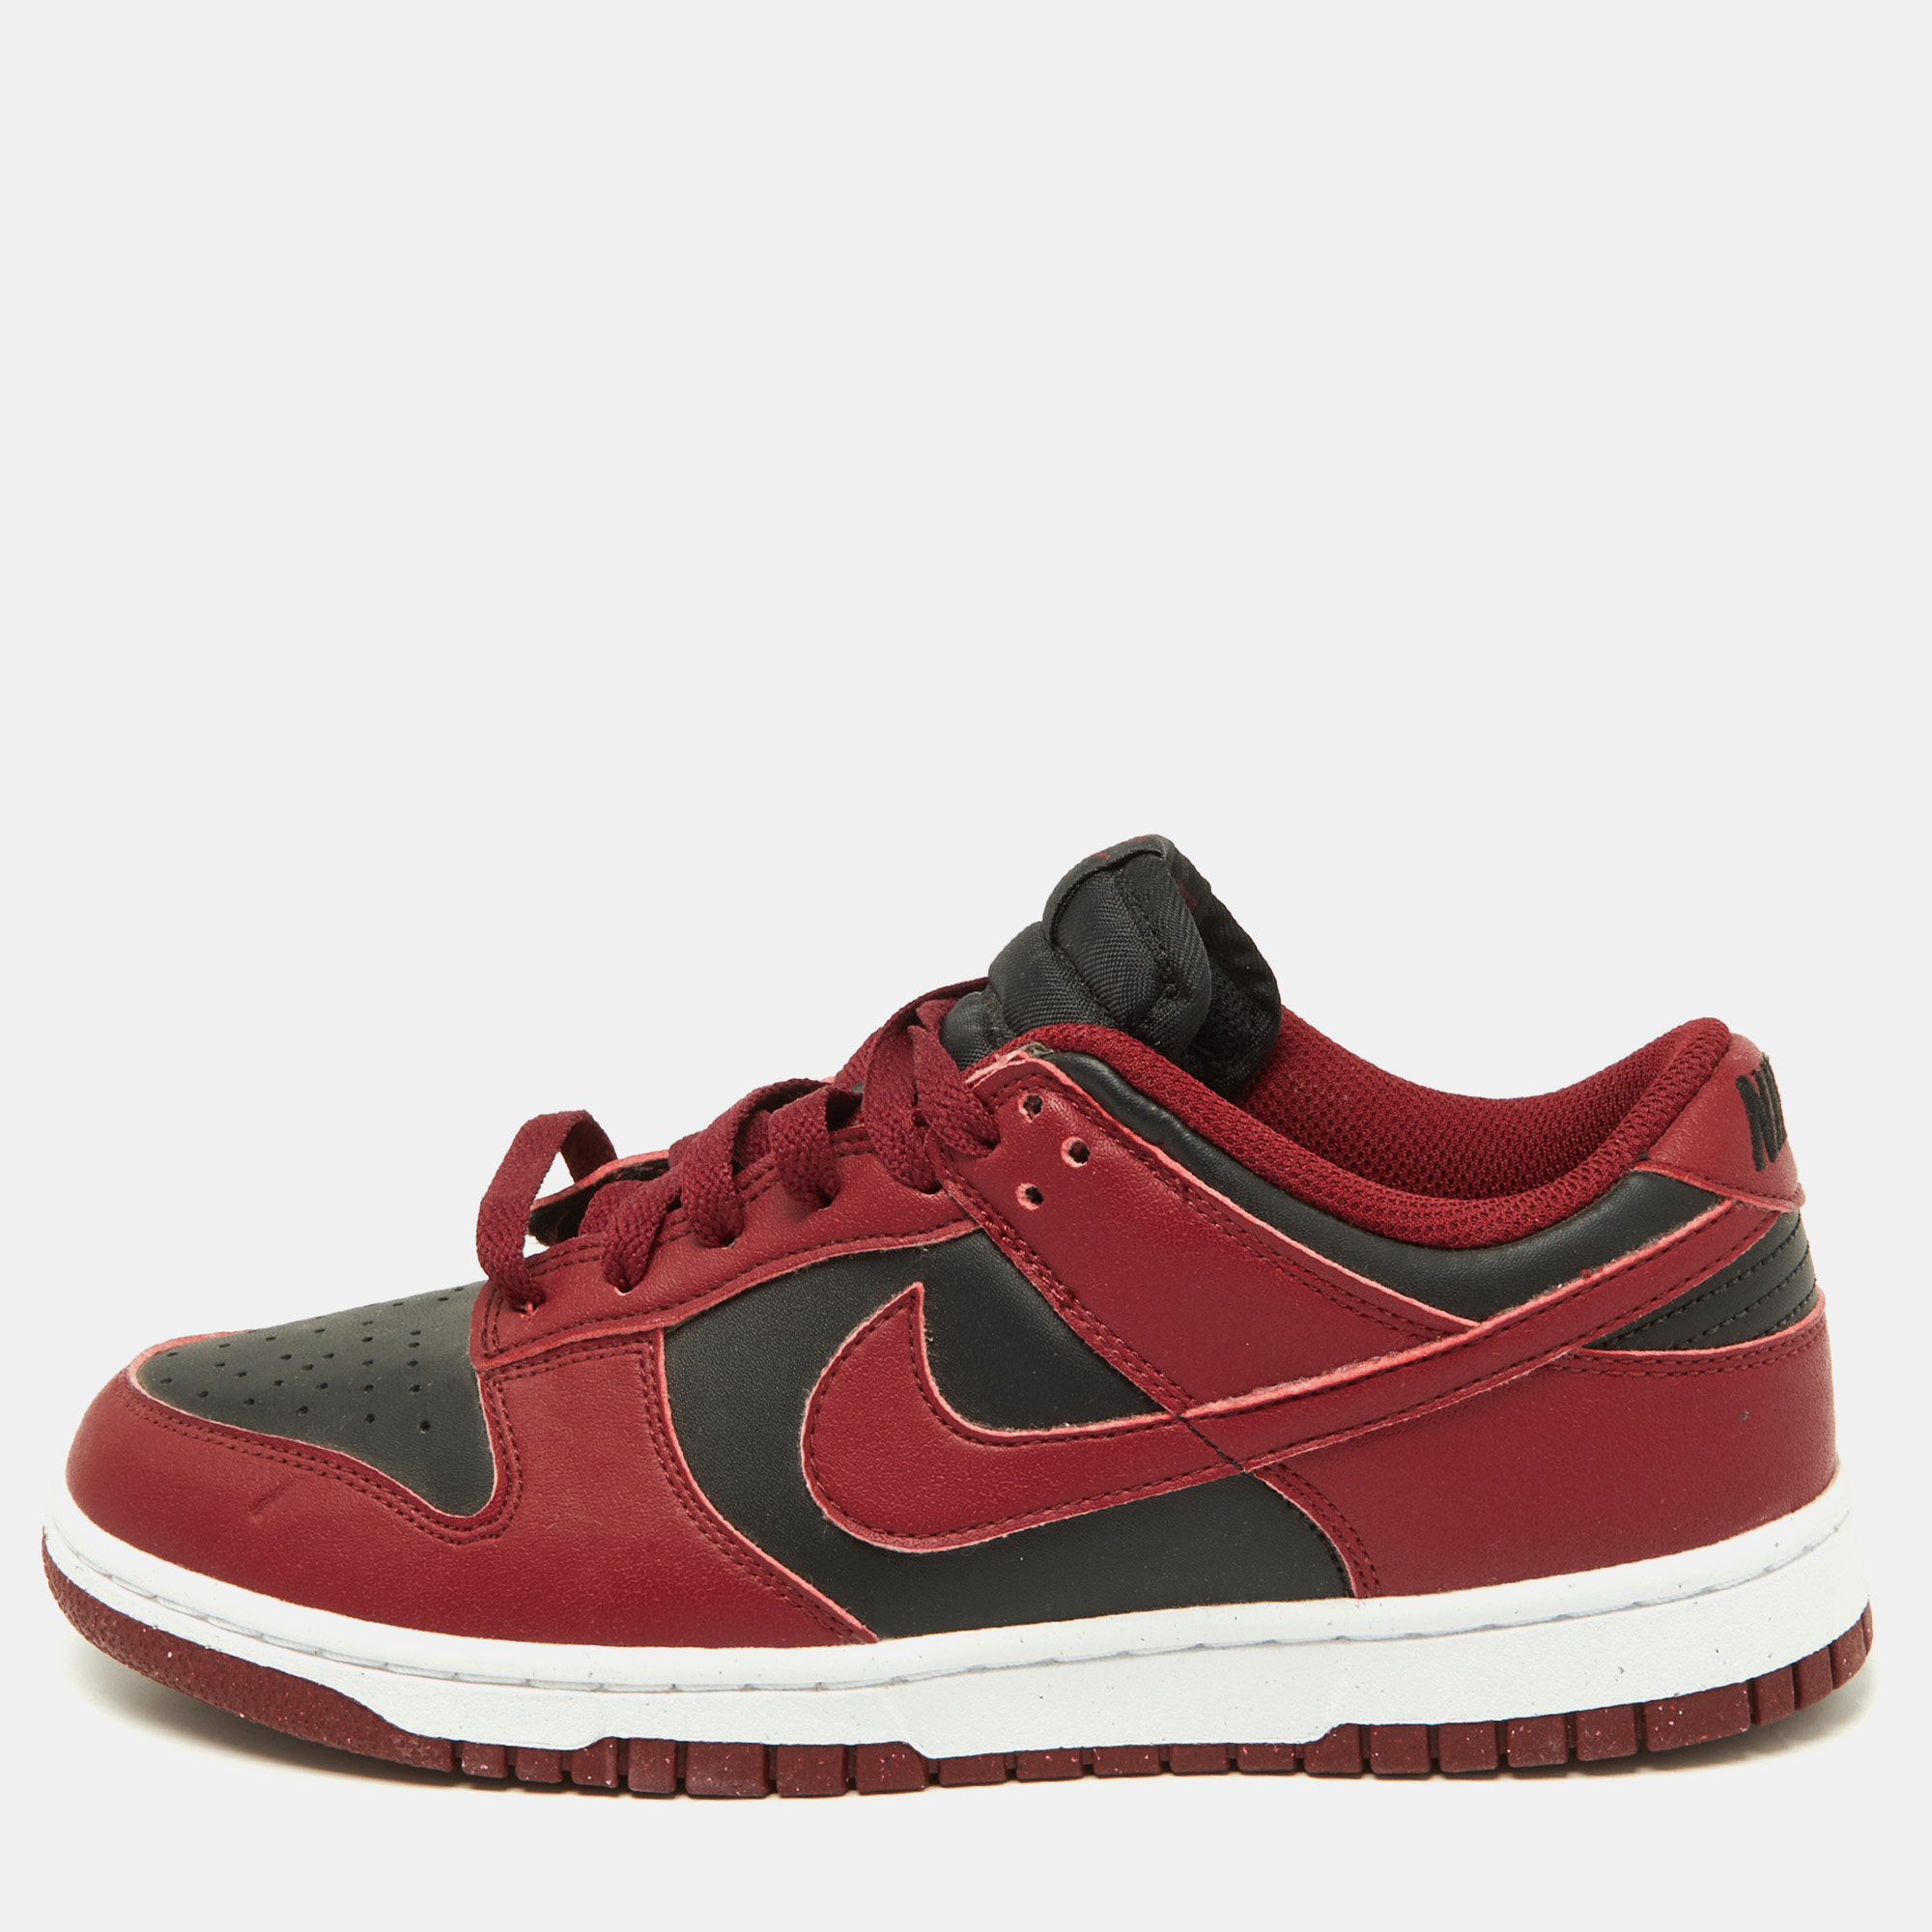 

Nike Red/Black Leather Dunk Low Top "Team Red" Sneakers Size